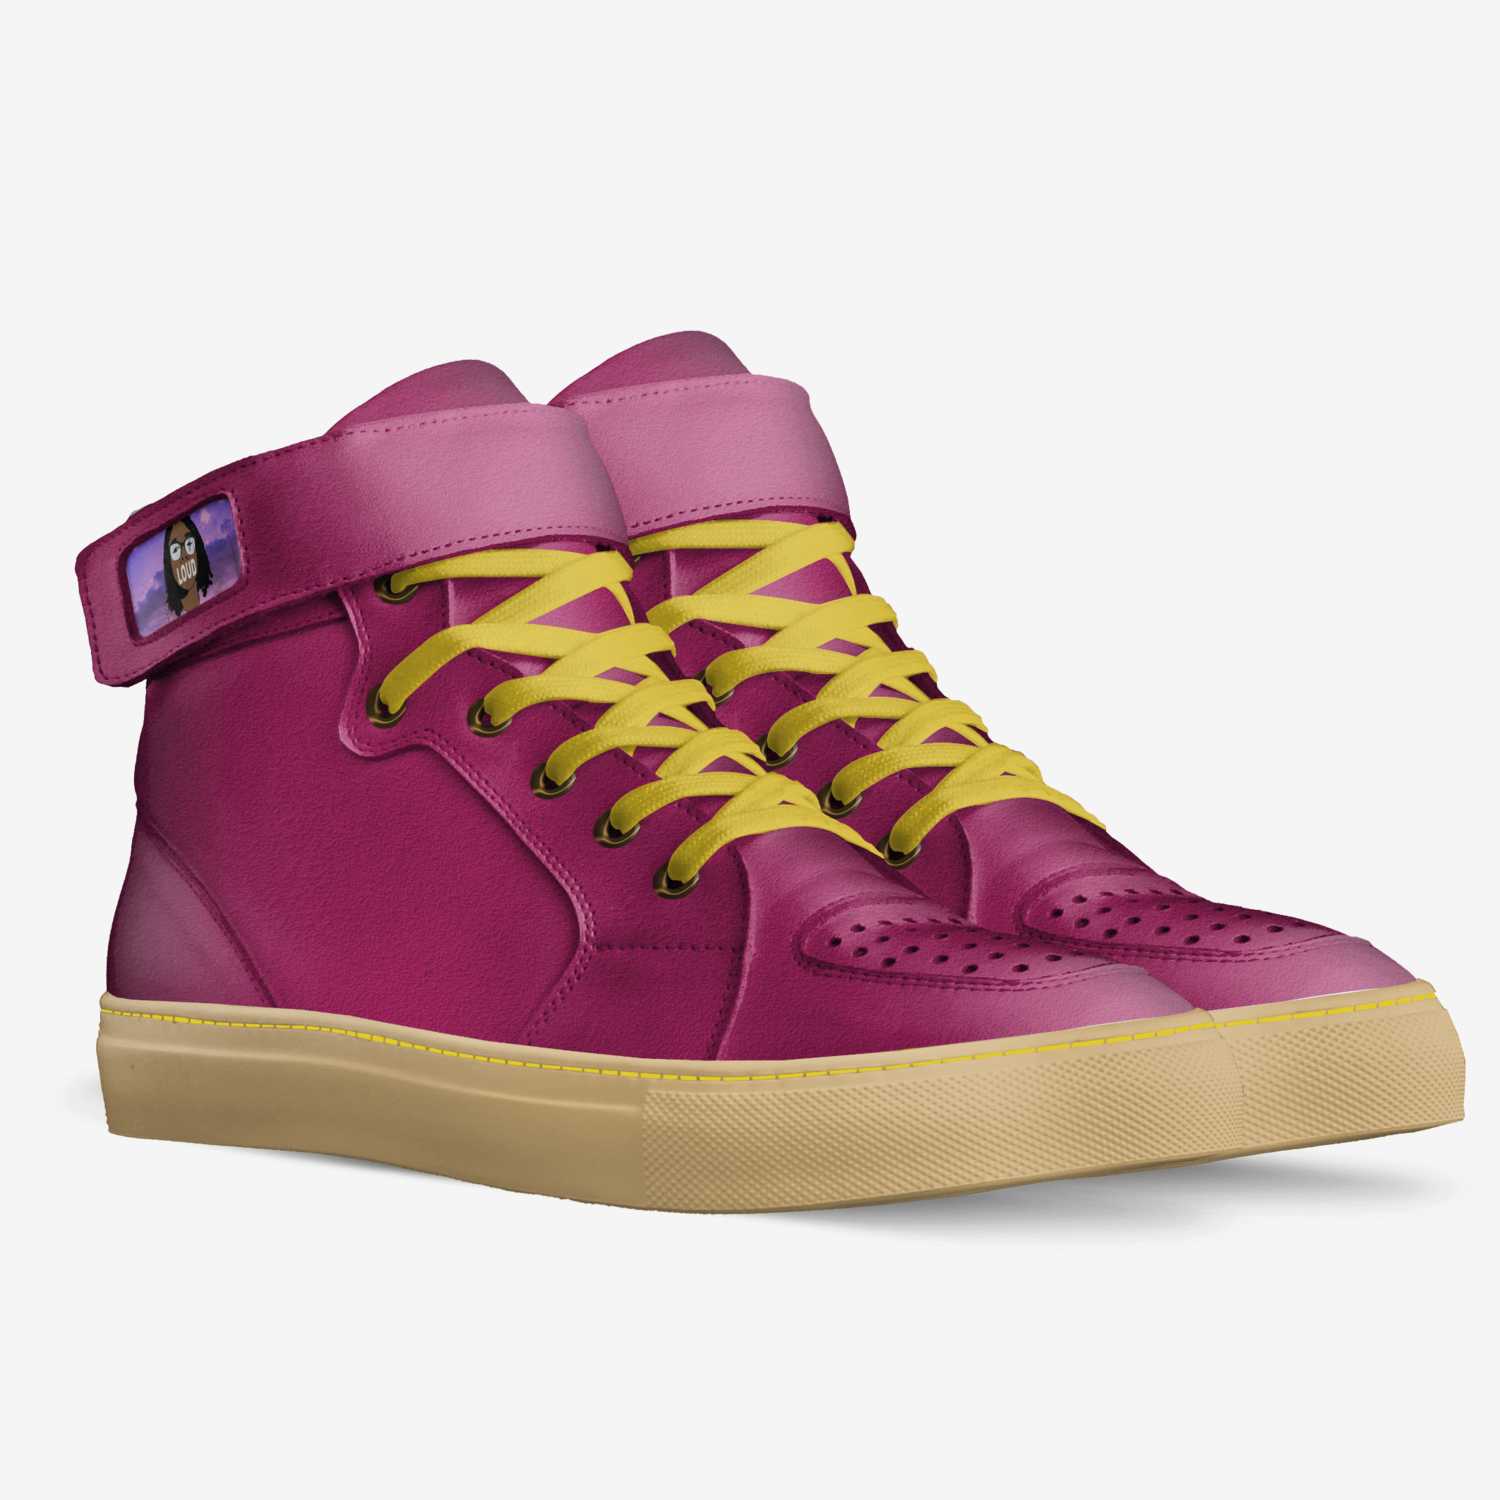 LoudMouth | A Custom Shoe concept by Terrell Dugue